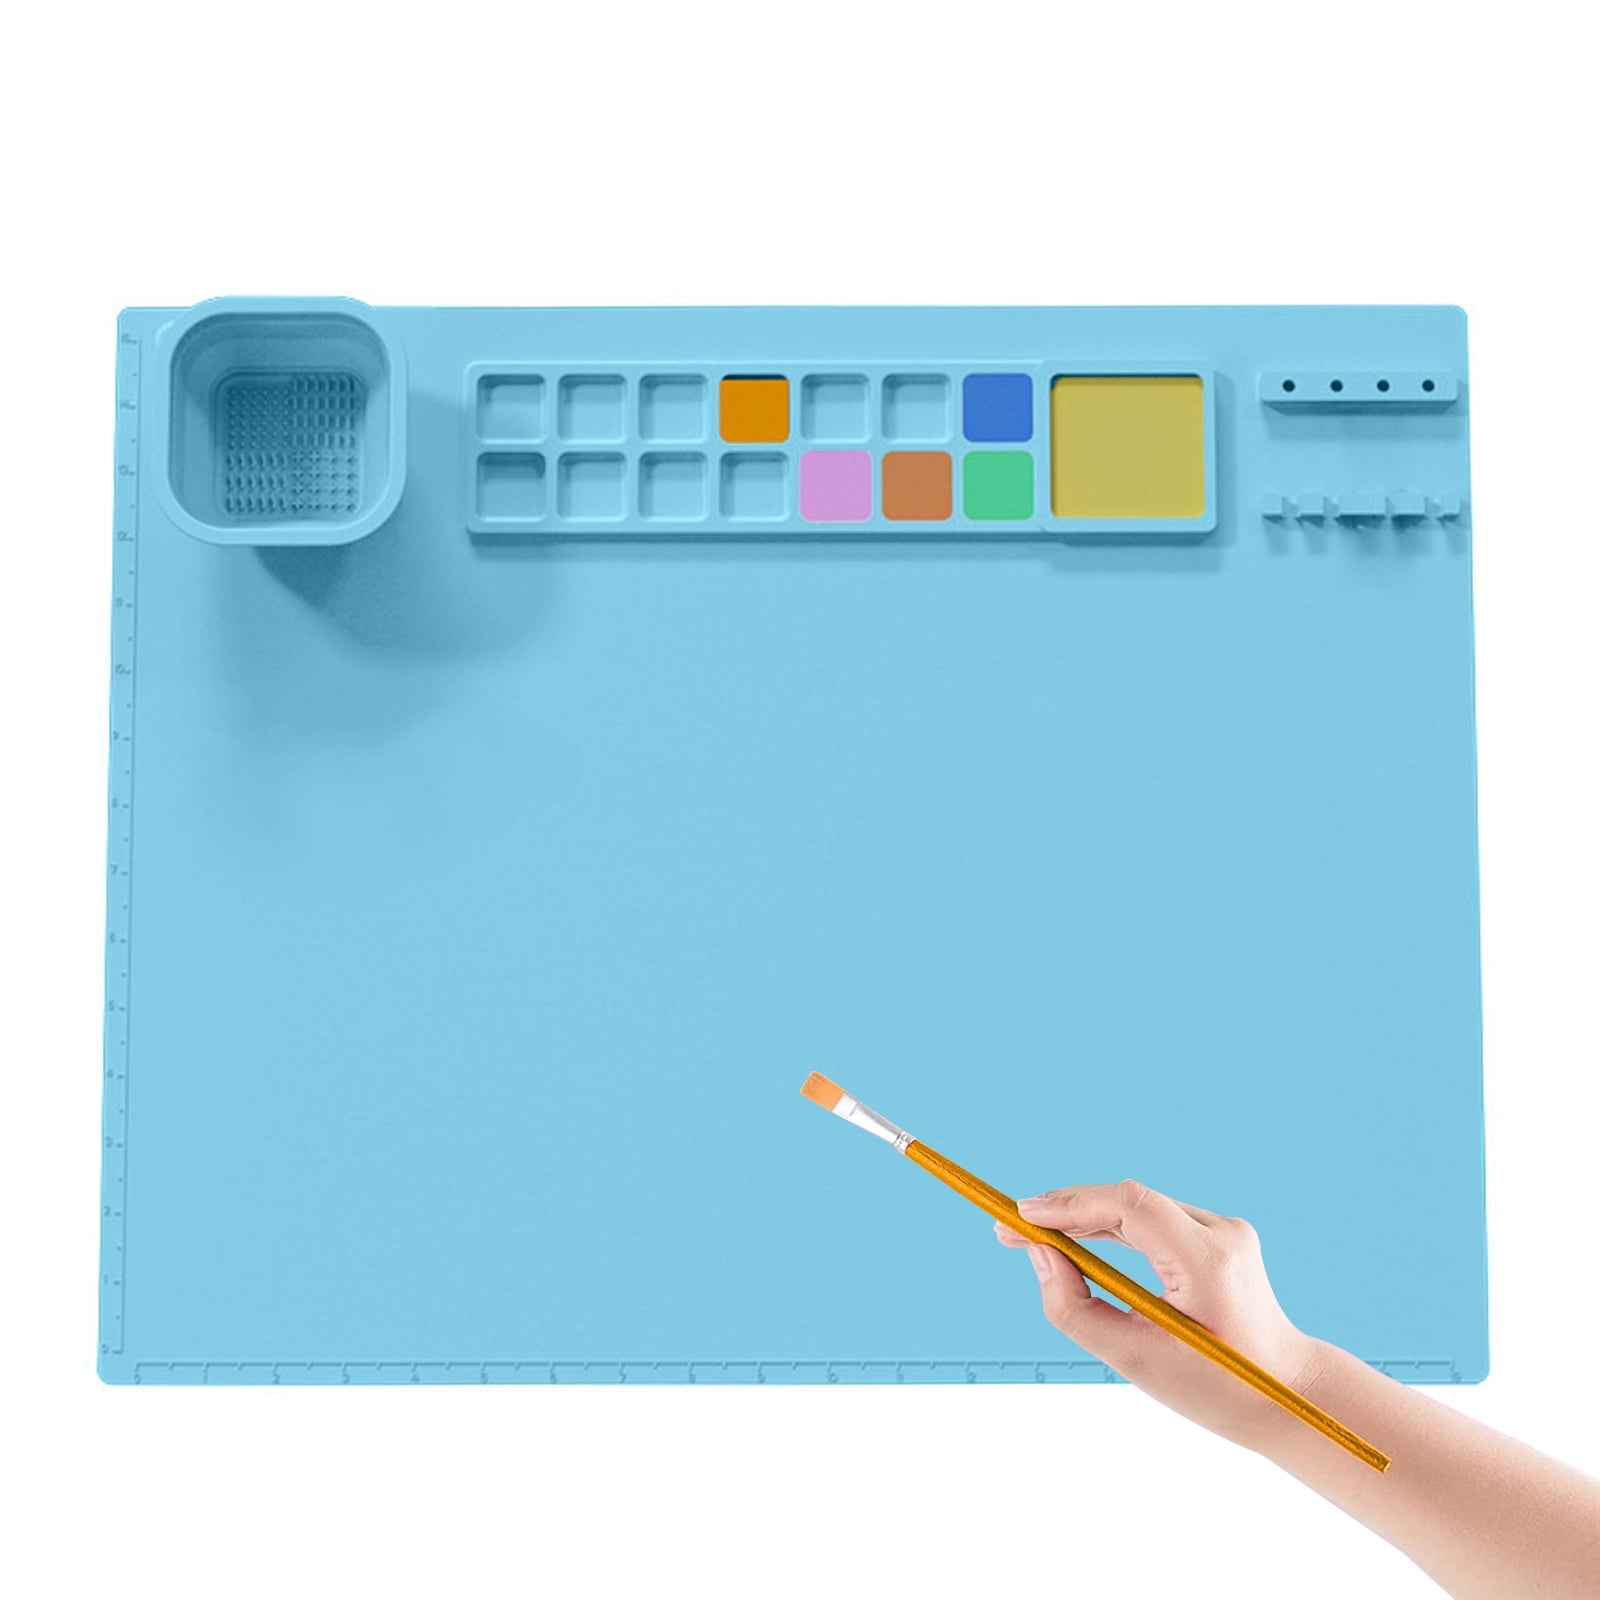  Silicone Painting Mat - 19.7X15.7 Silicone Art Mat with 1  Water Cup for Kids - Silcone Craft Mat has12 Color Dividers - 2 Paint  Dividers (White) : Arts, Crafts & Sewing